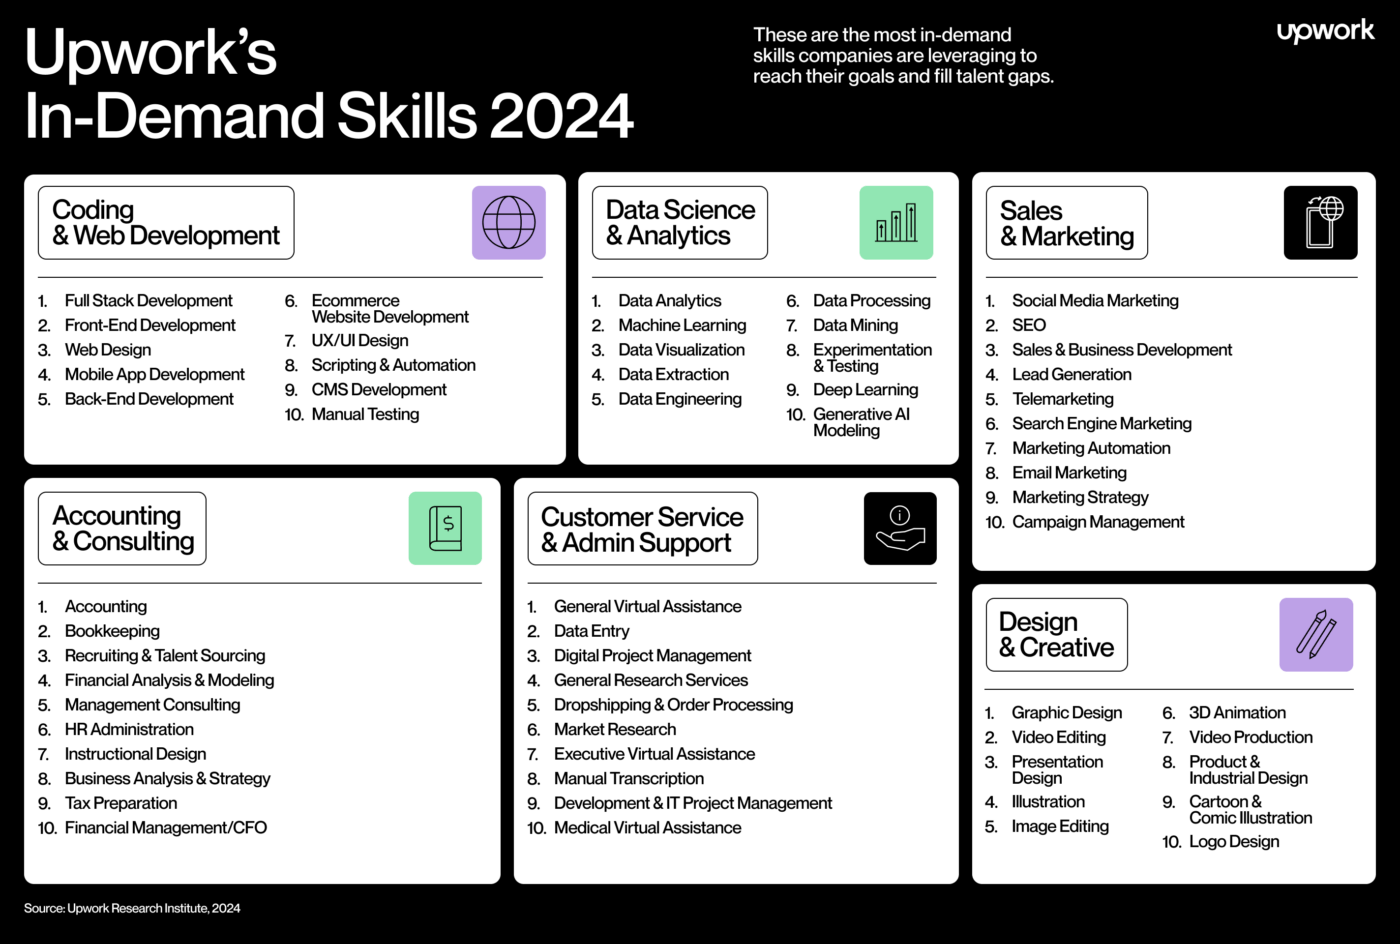 Infographic explaining the most in-demand skills in 2024